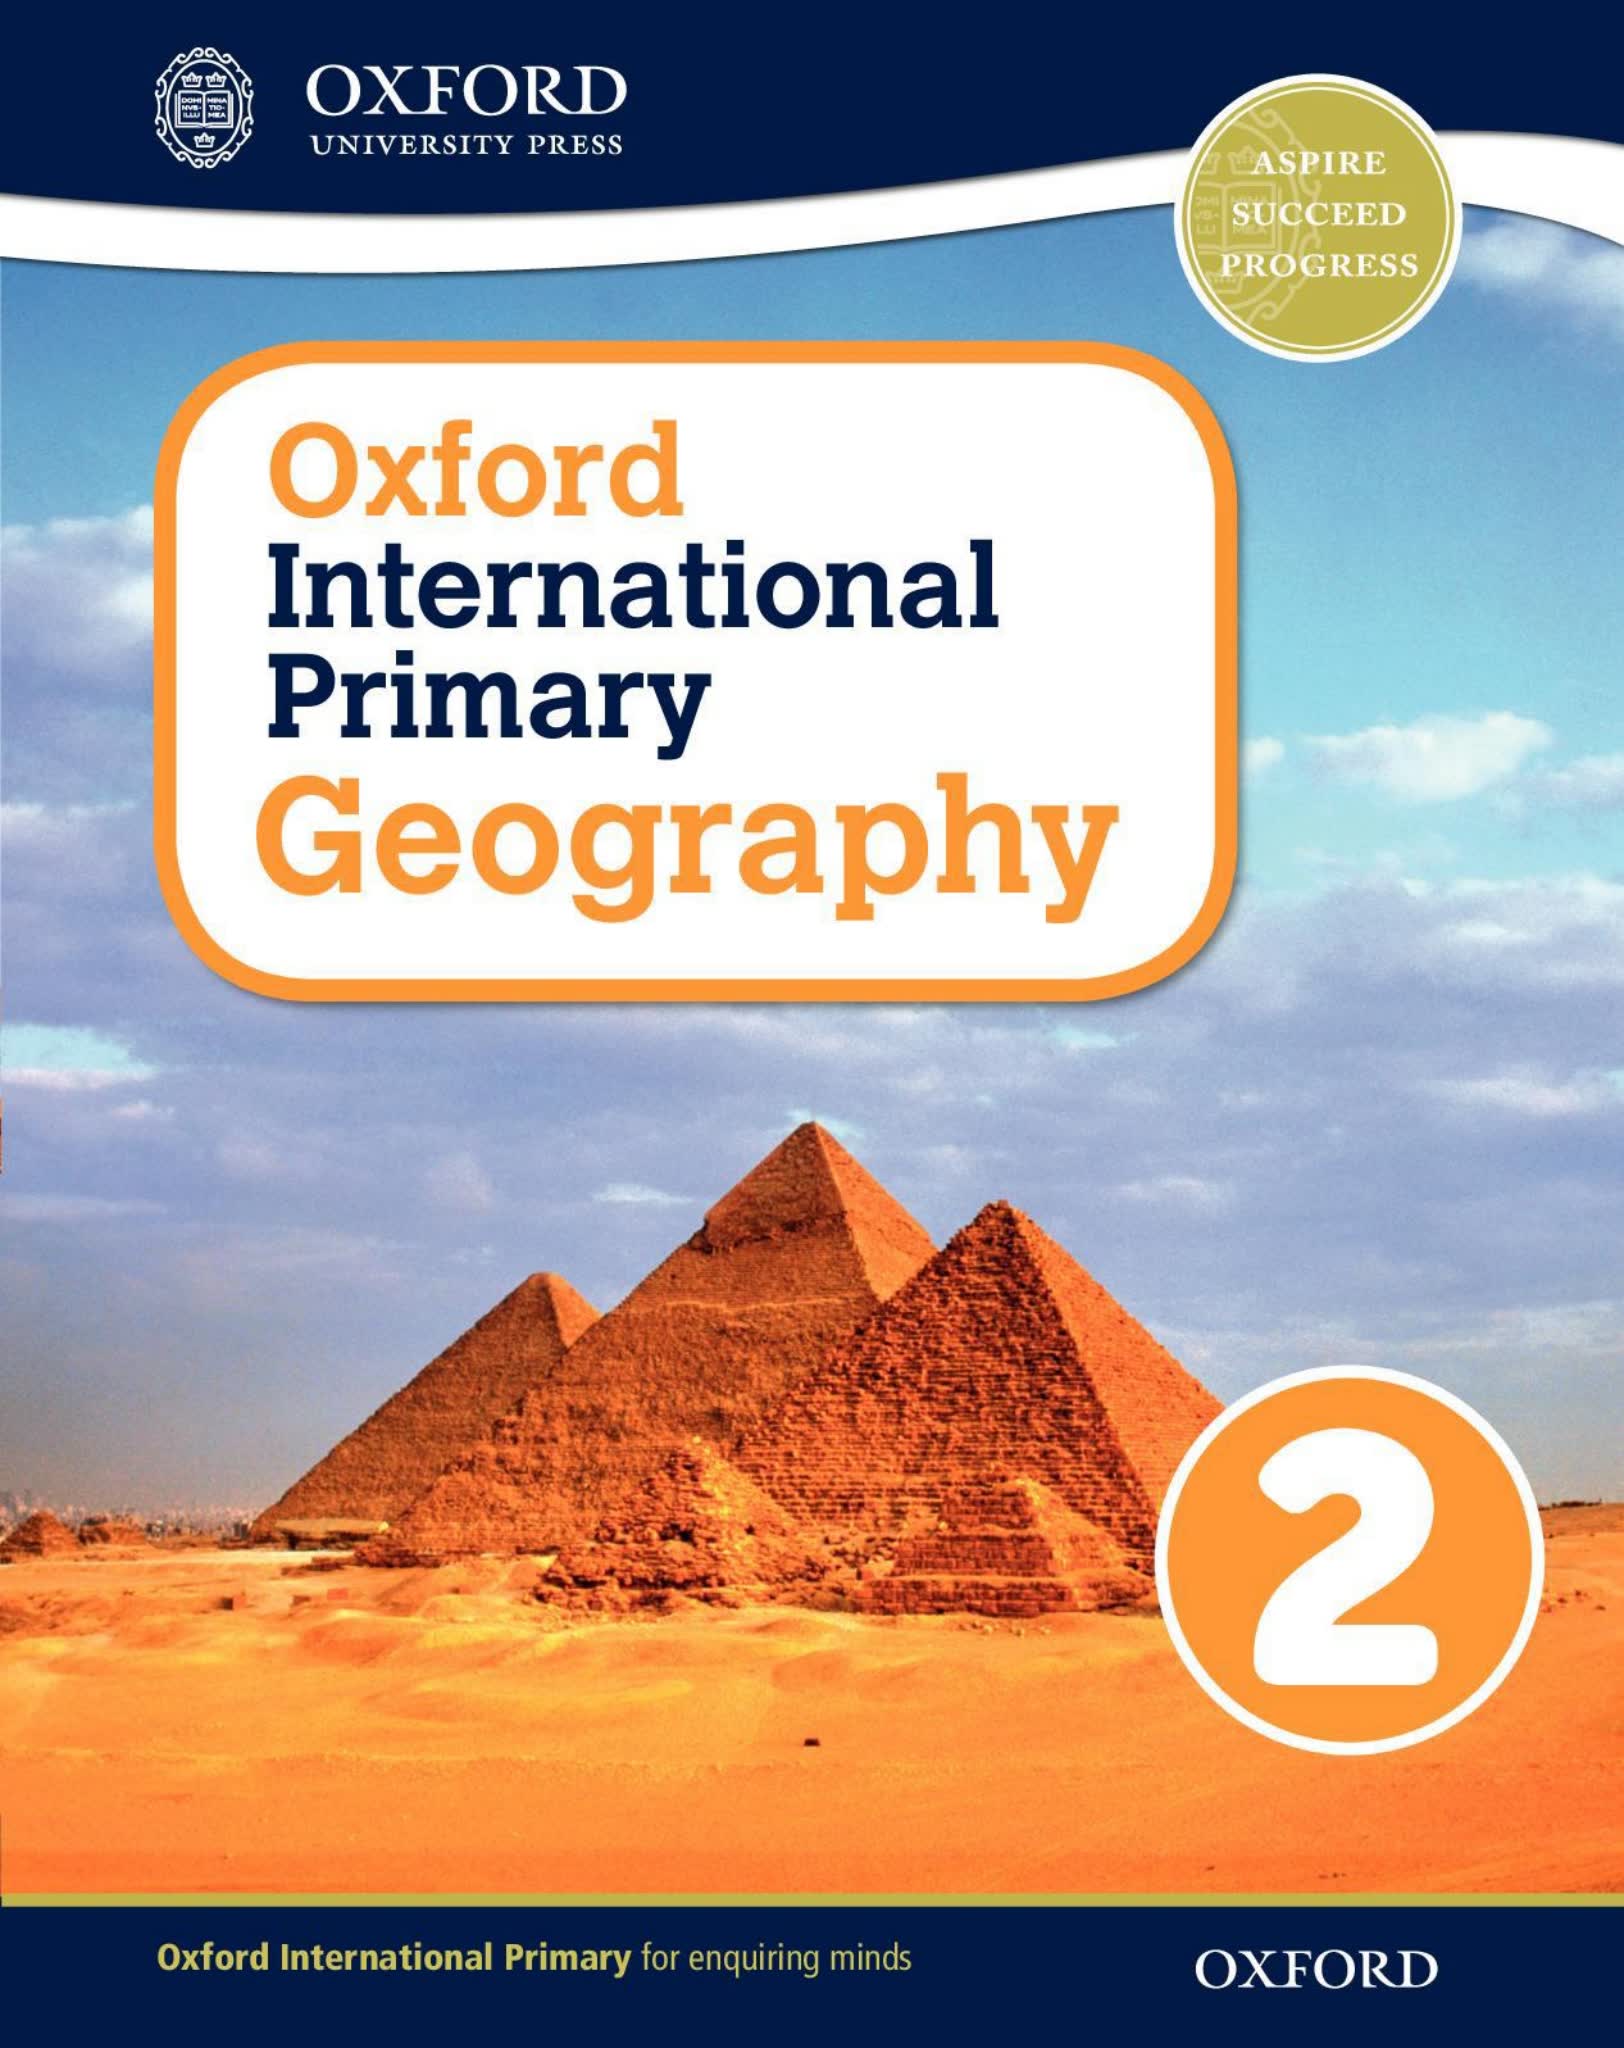 oxford_international_primary_geography0